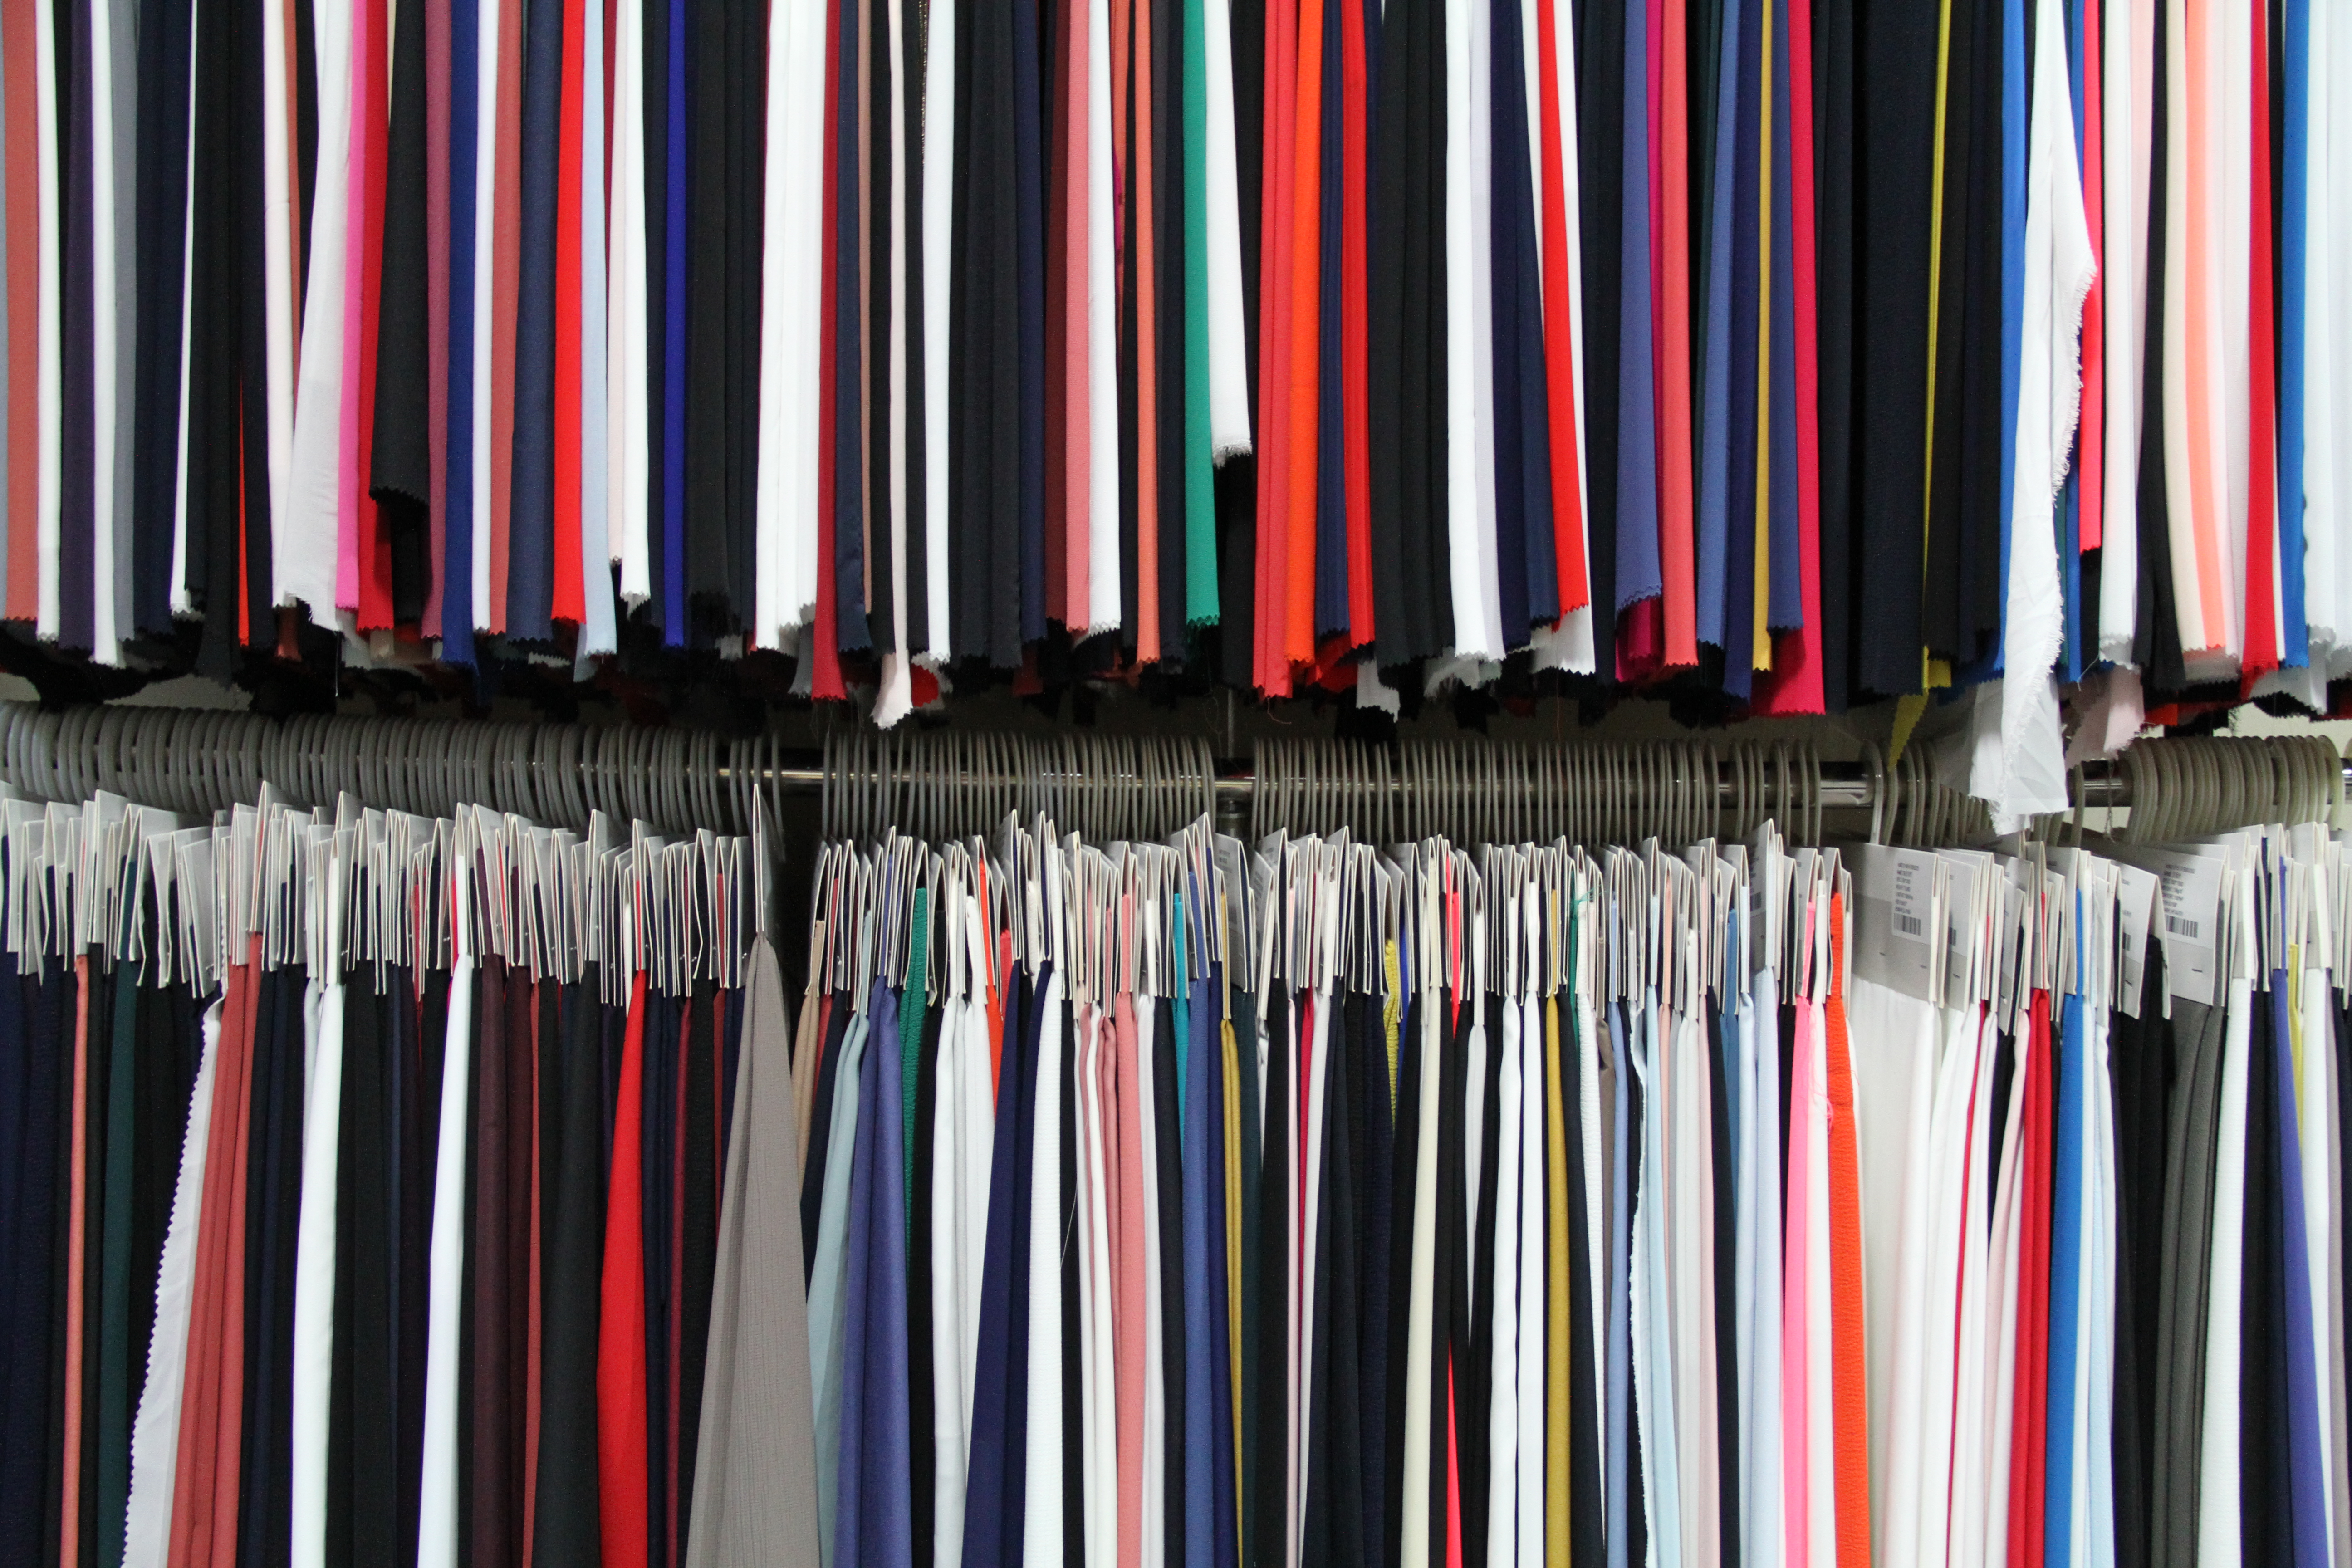 Amongst Wellsilk’s assets is the company’s large fabric library, offering a vast selection of fabric hangers with various qualities, prints, and hues.